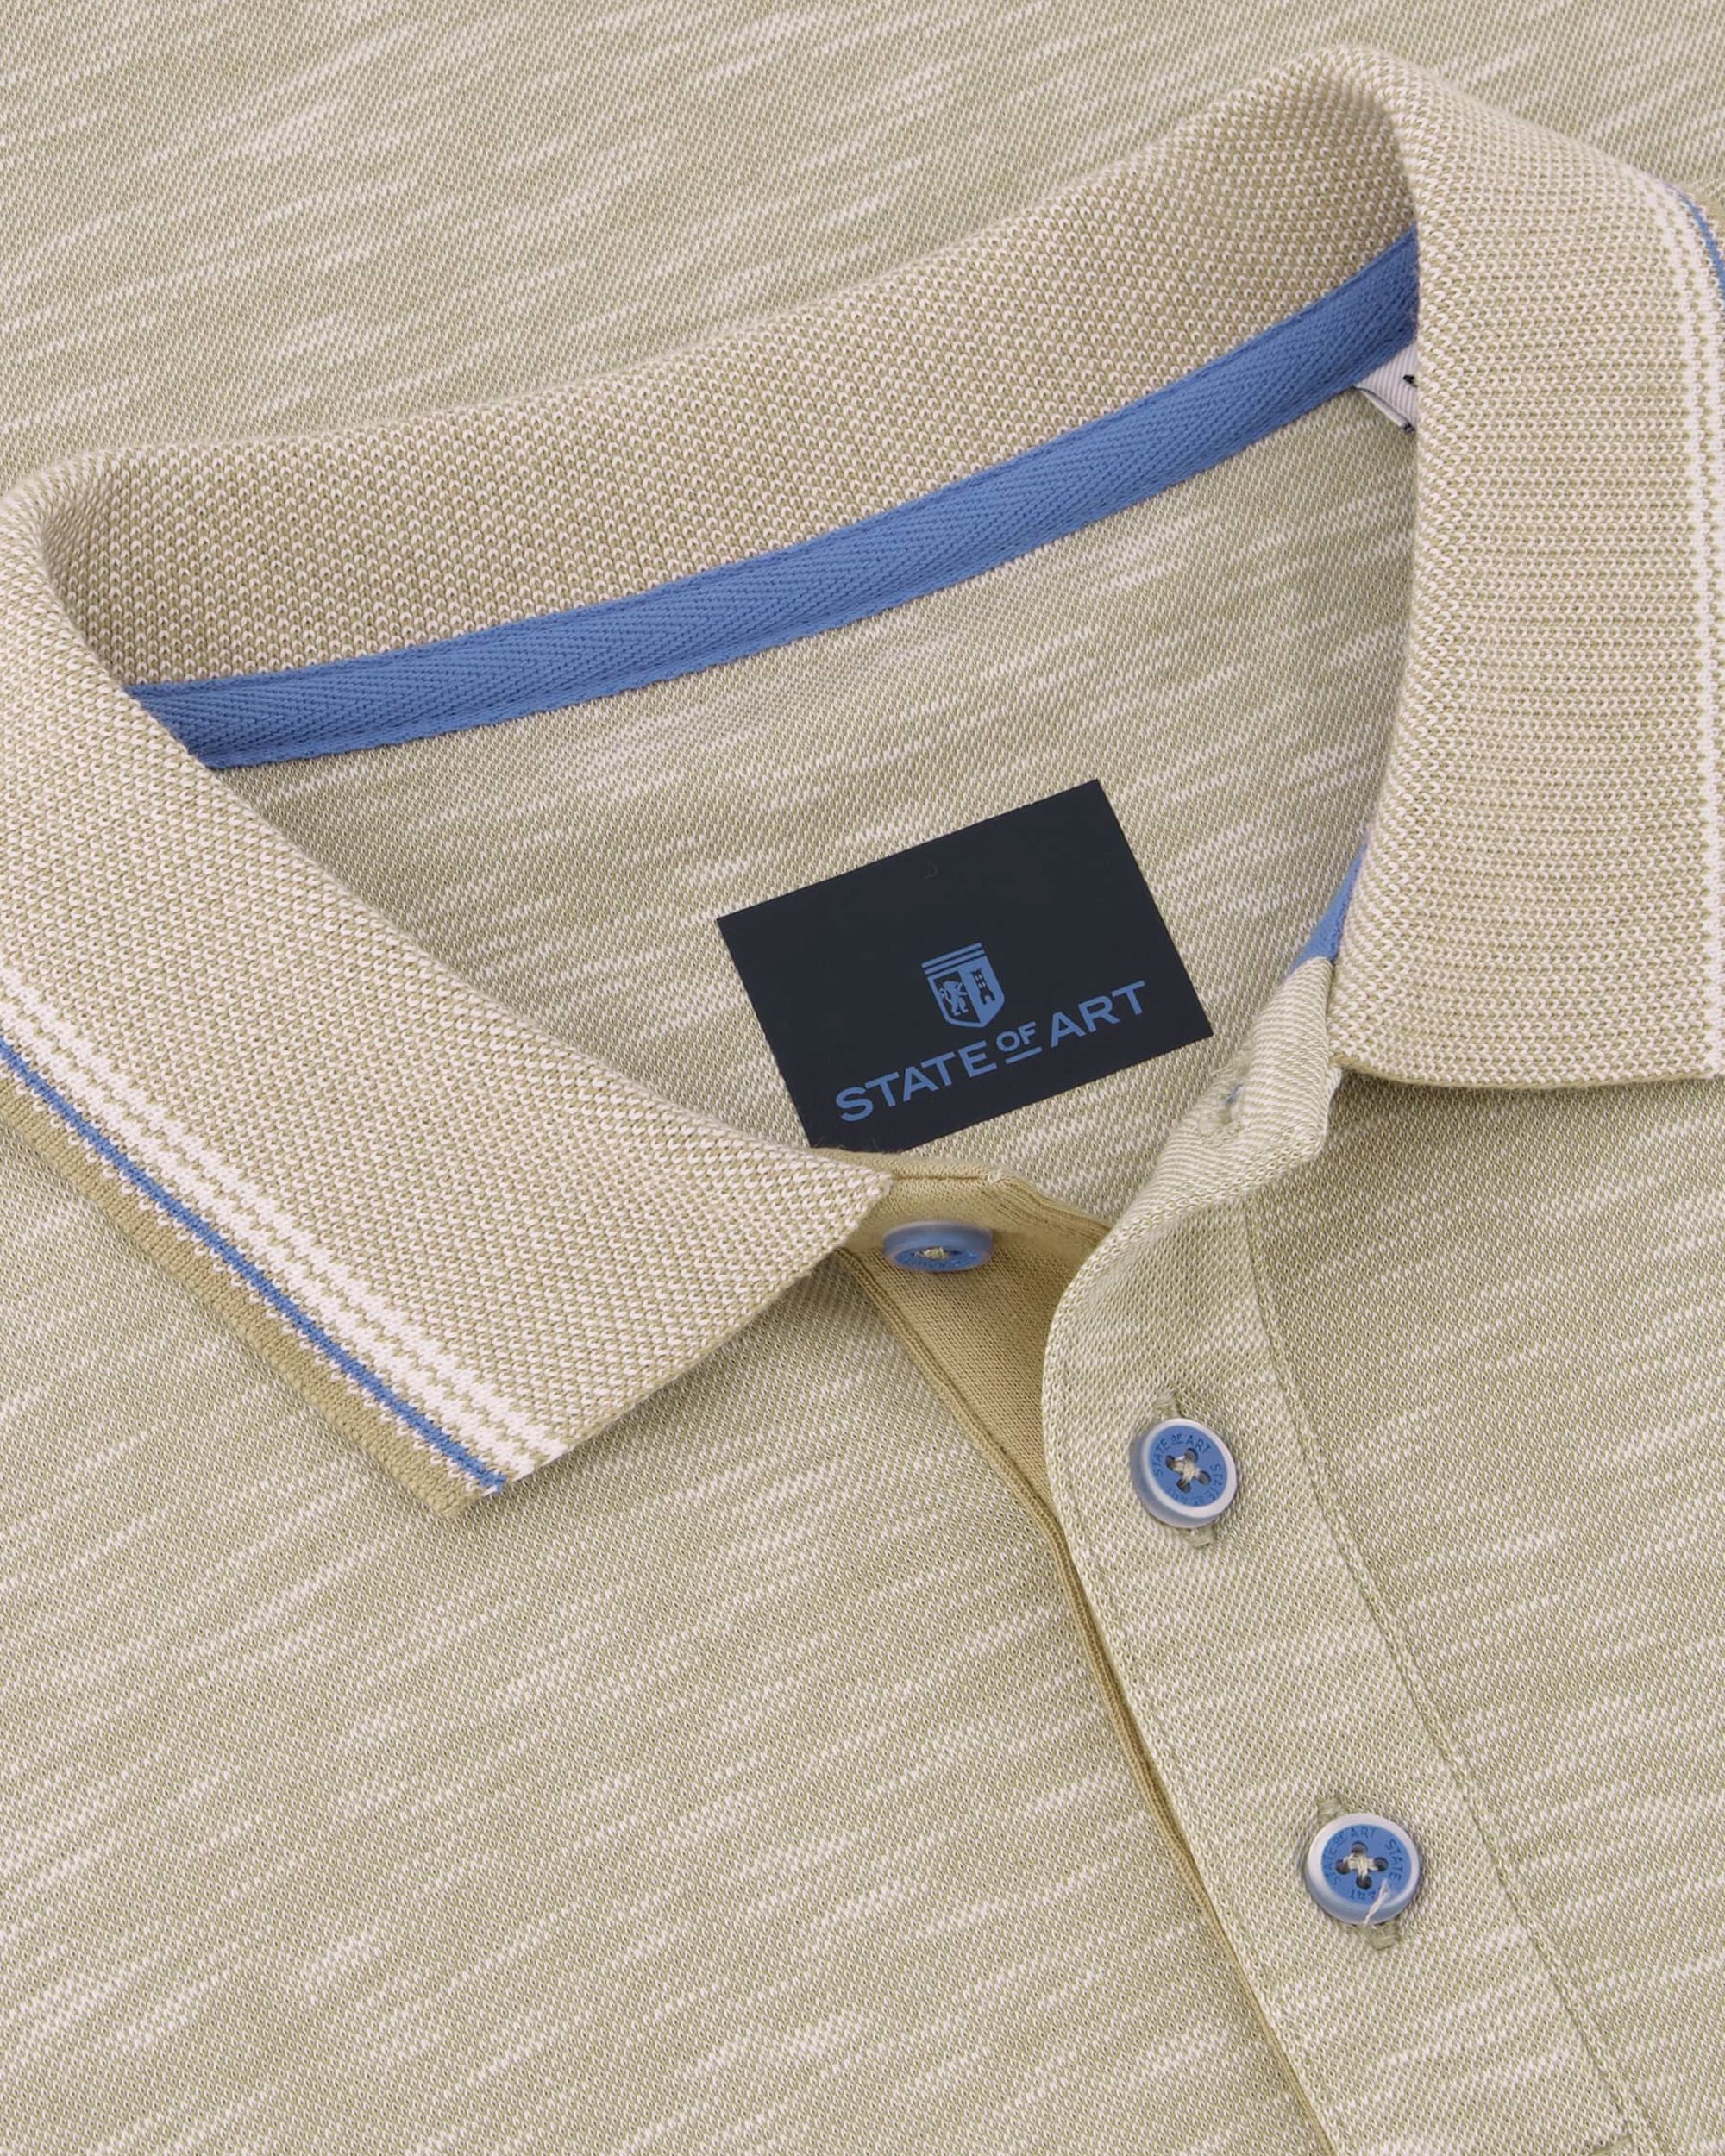 State of Art Polo KM Beige 094968-001-4XL